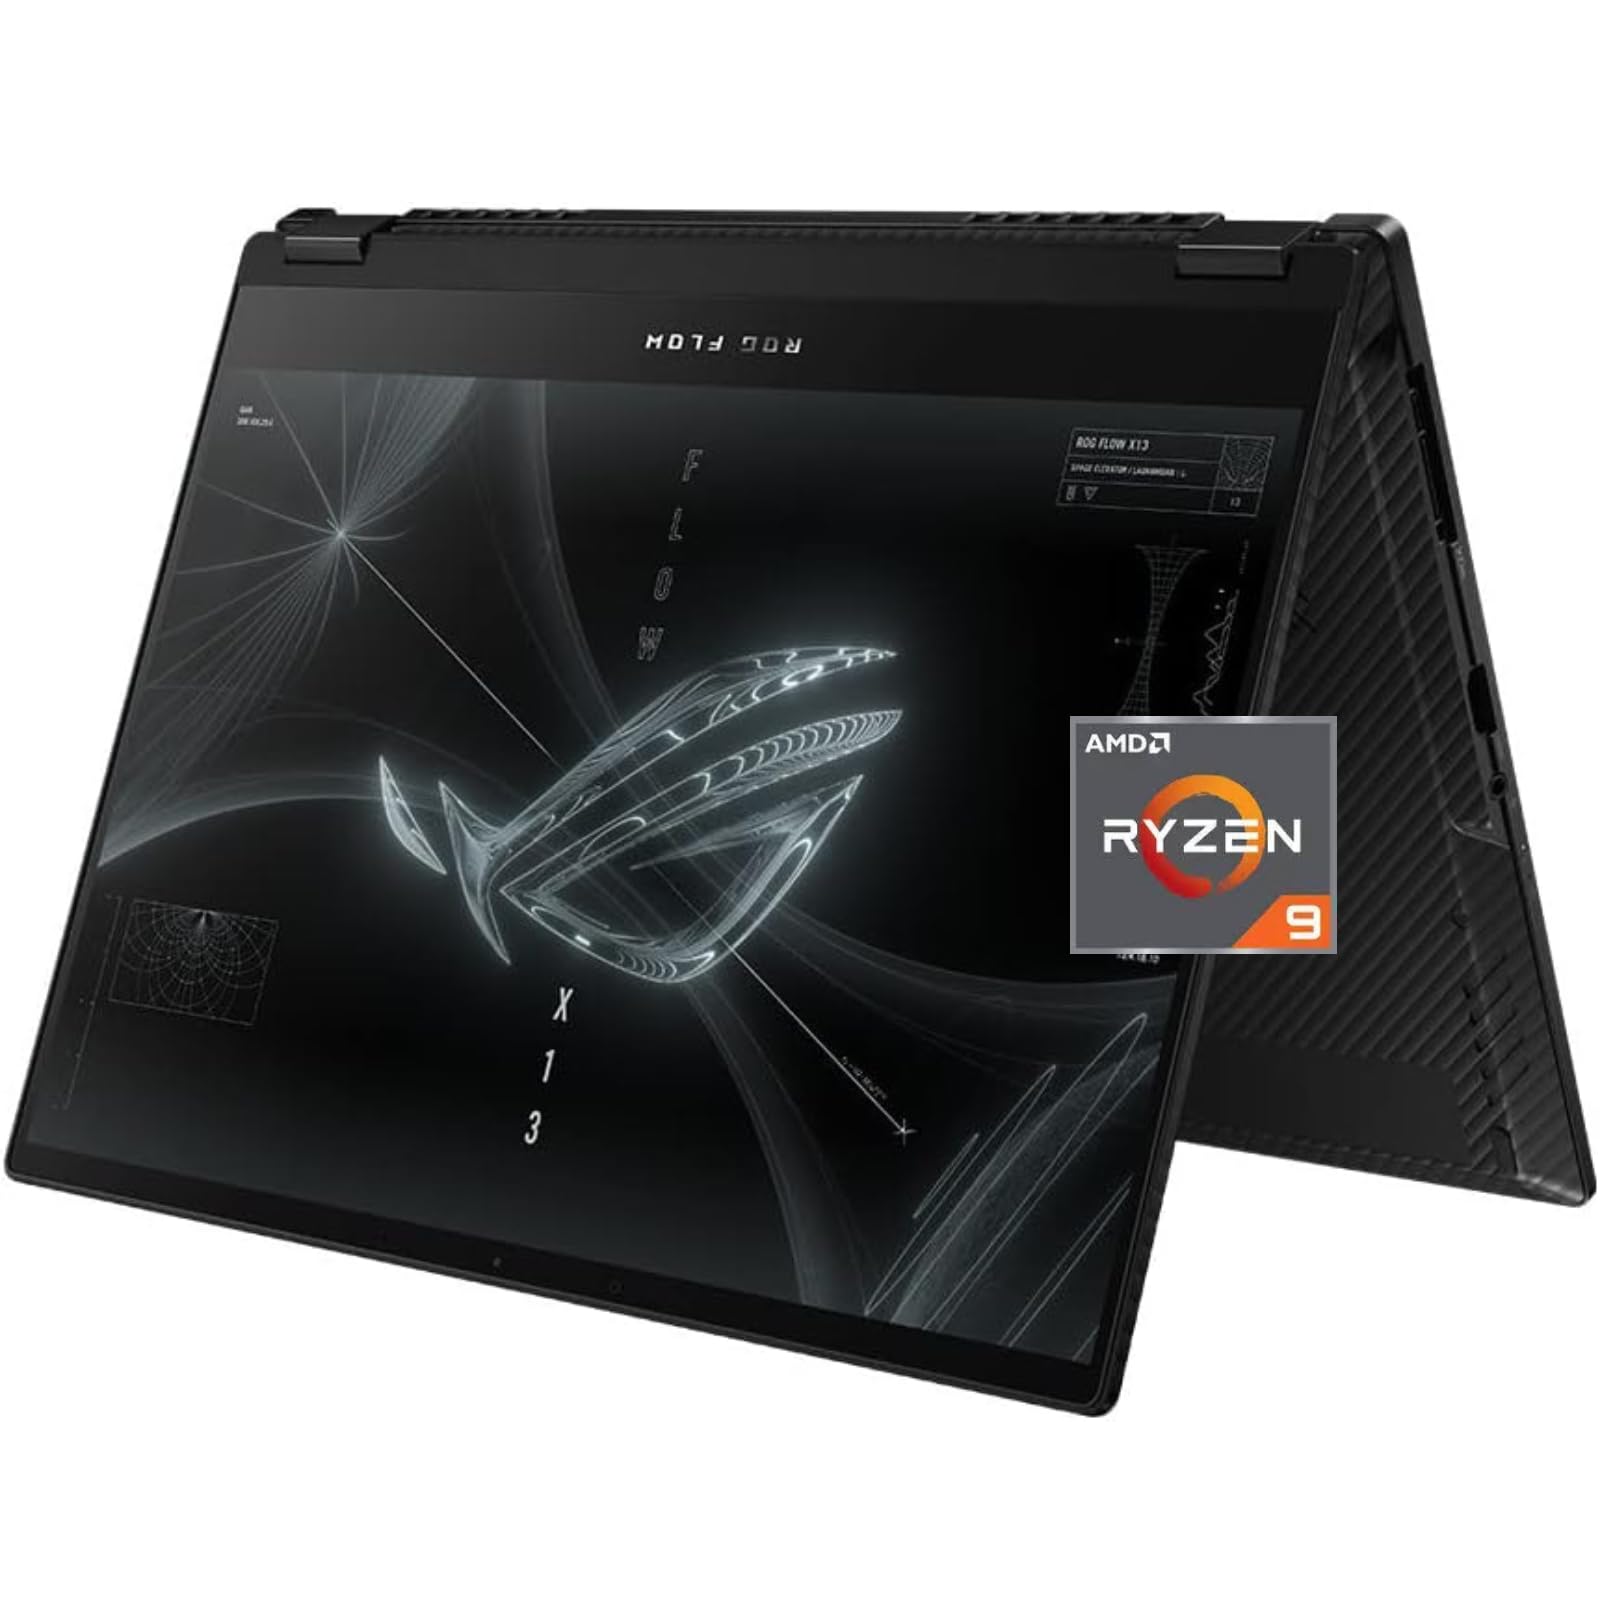 ASUS laptop with improved WiFi signal